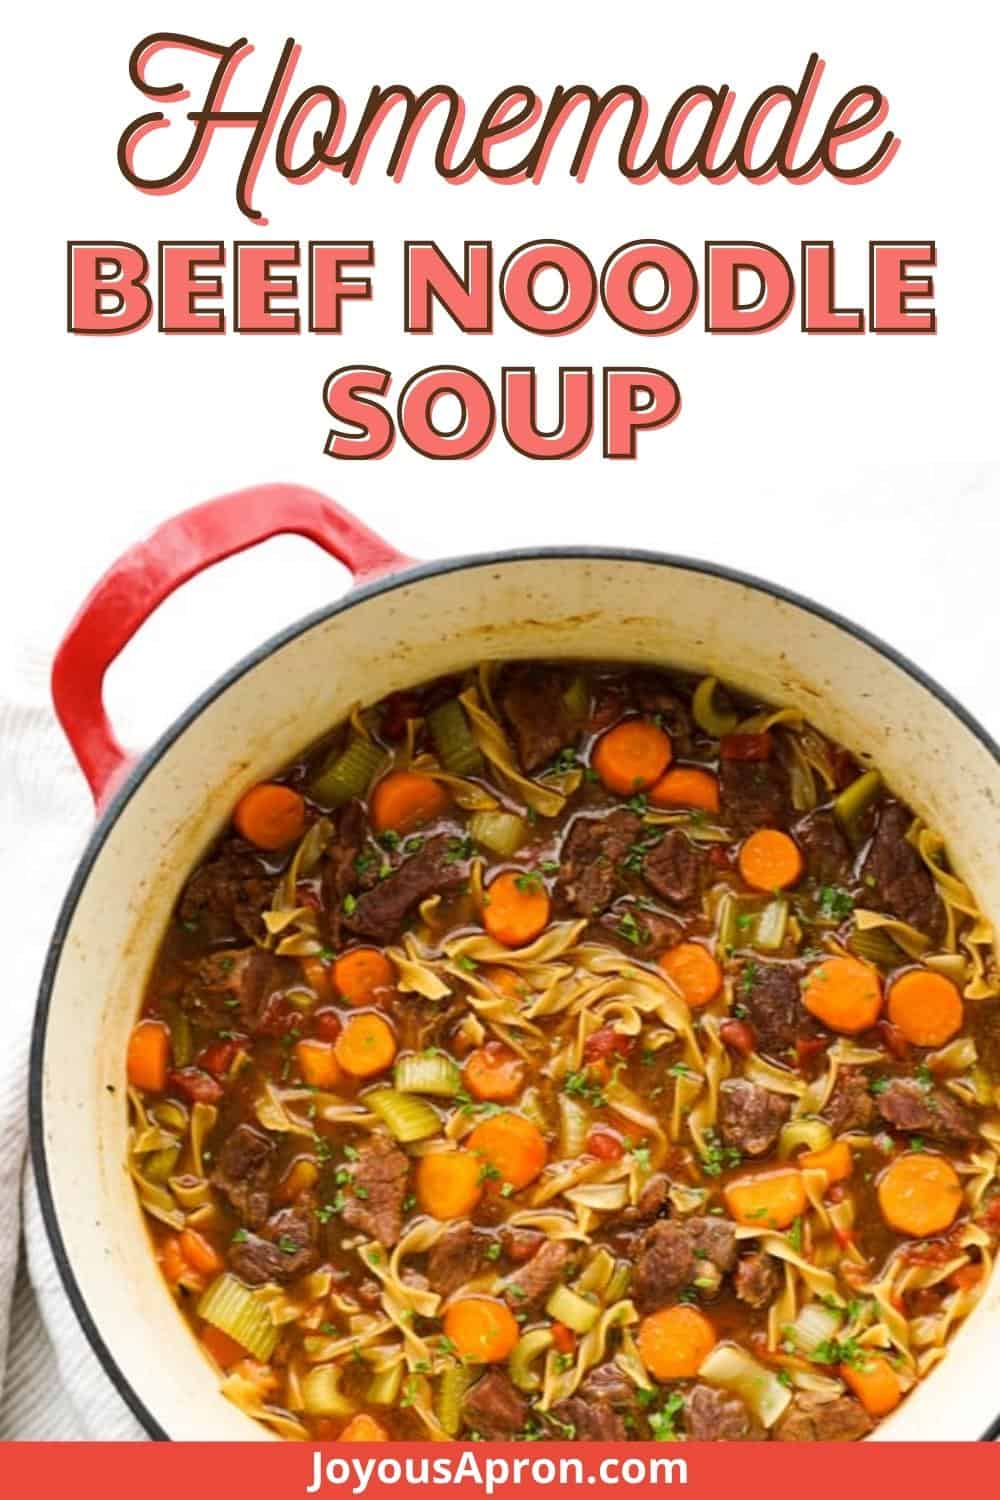 Beef Noodle Soup - tender steaks, egg noodles, carrots, celery, and tomatoes simmered in flavorful herb-infused beef broth. Cozy and comforting homemade soup recipe for the Fall and winter! via @joyousapron